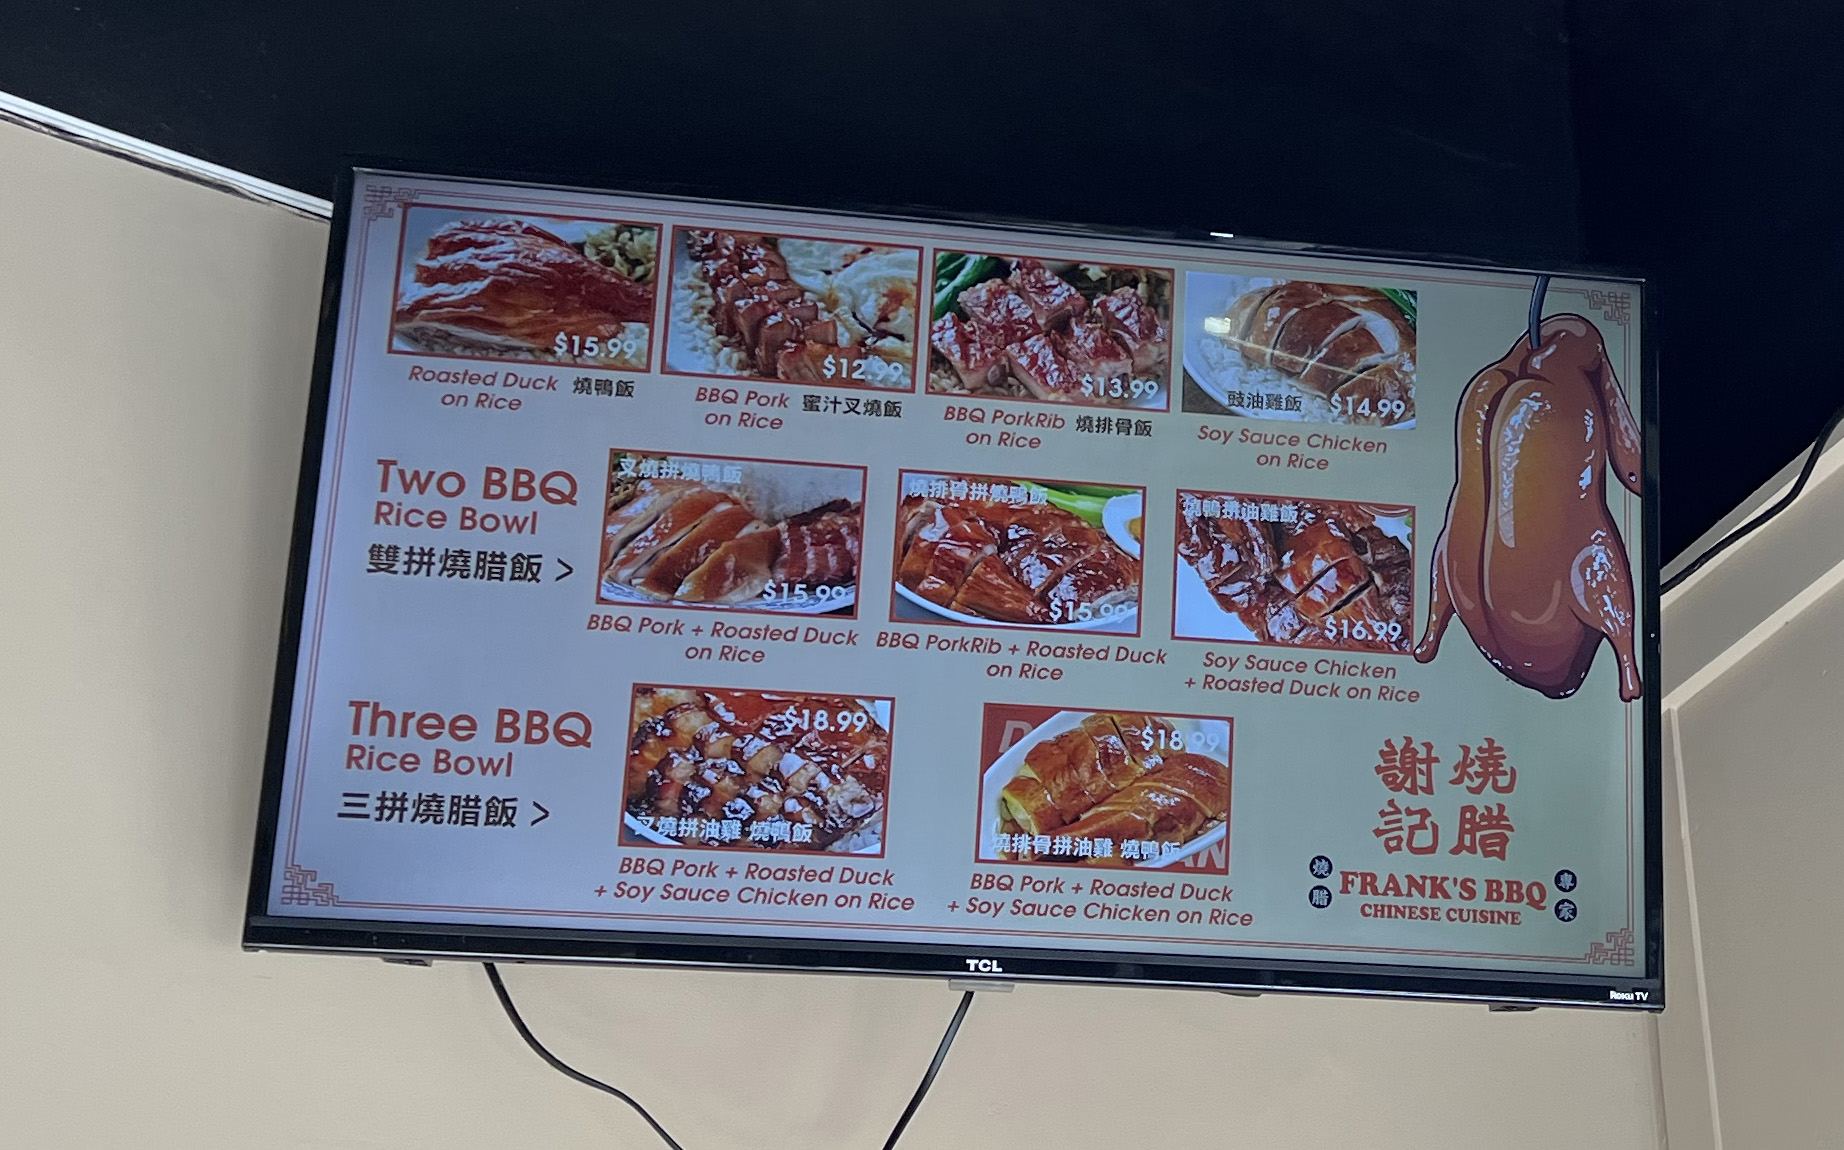 Menu at Frank's B.B.Q. in Lake Forest, California (Photo by Julie Nguyen)